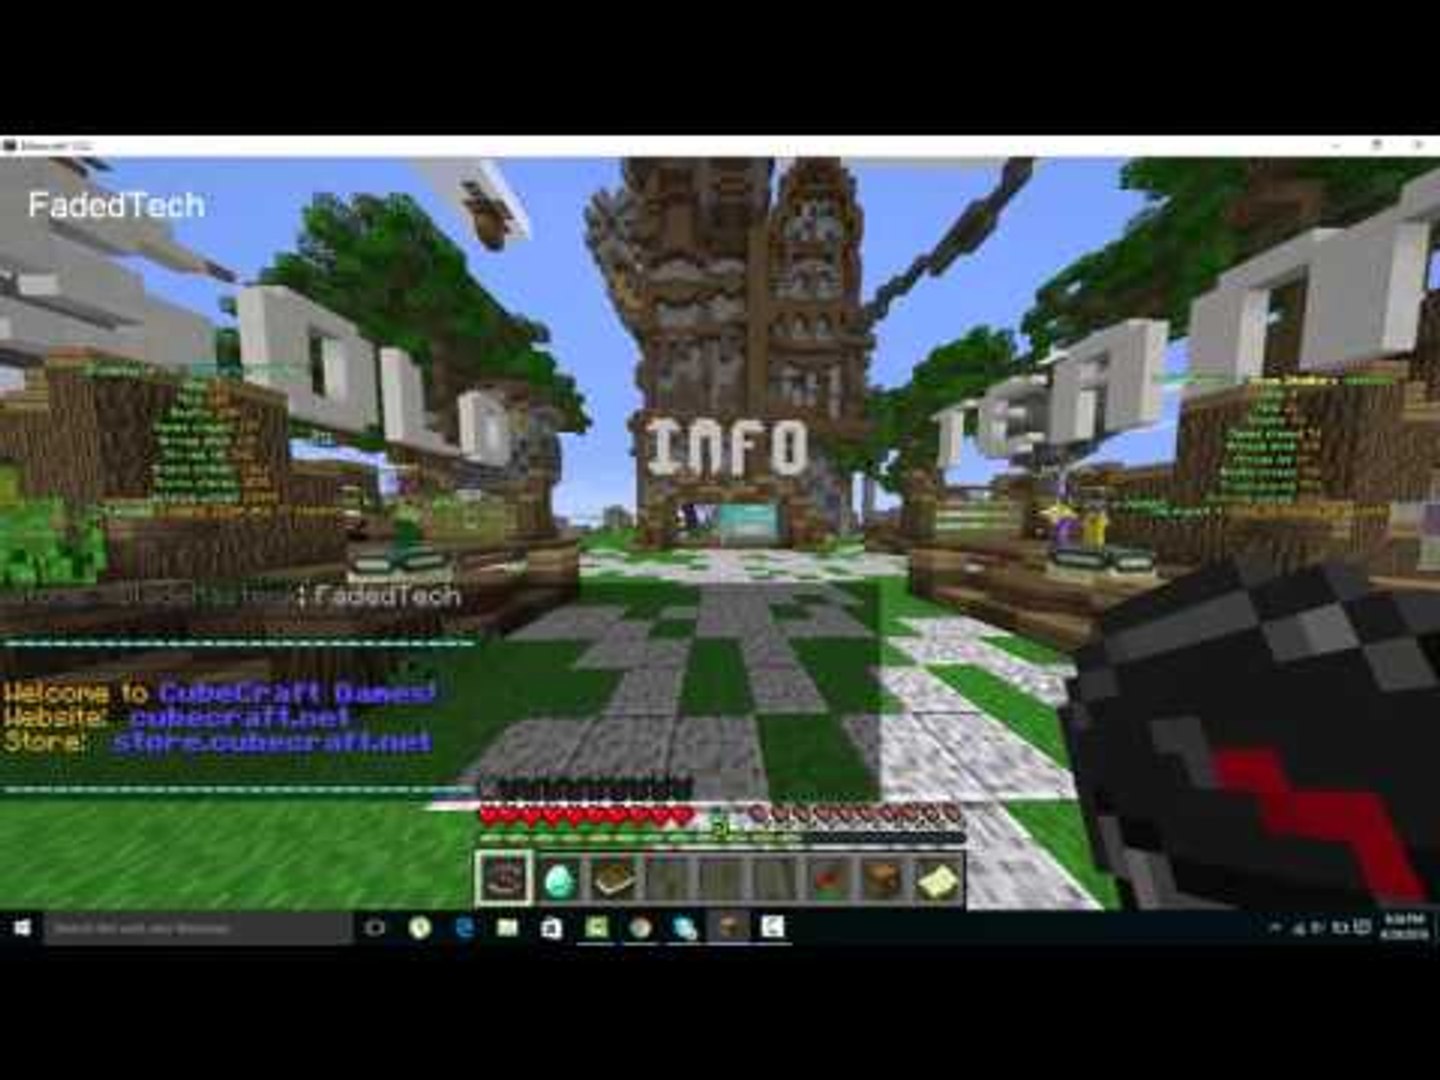 Hypixel Server Network for Minecraft - Homemade Minecraft wrapping